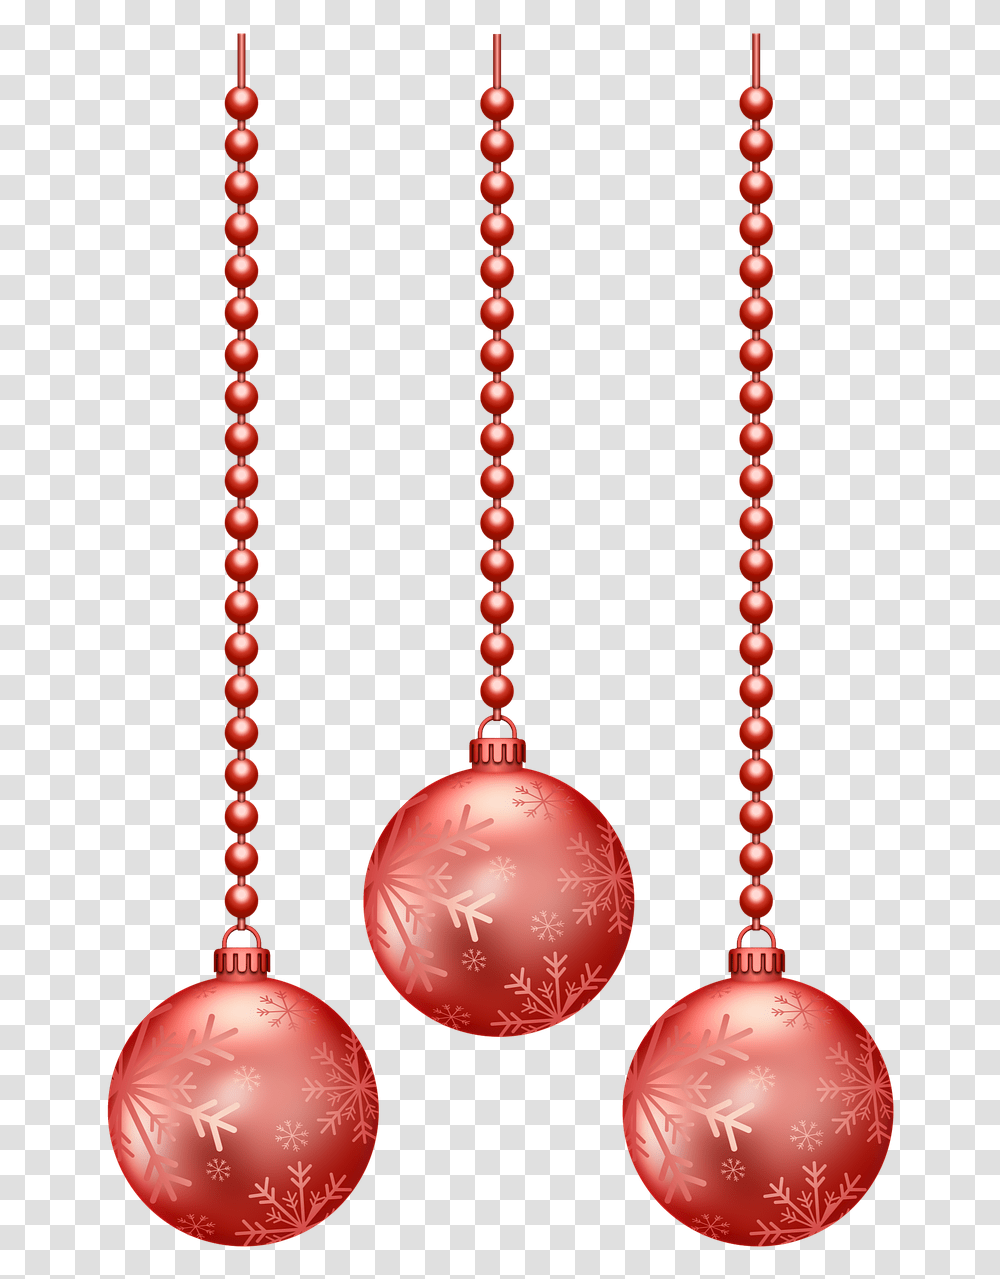 Christmas Baubles Bauble Holidays Free Image On Pixabay Christmas Tree Chain, Ornament, Bead Necklace, Jewelry, Accessories Transparent Png